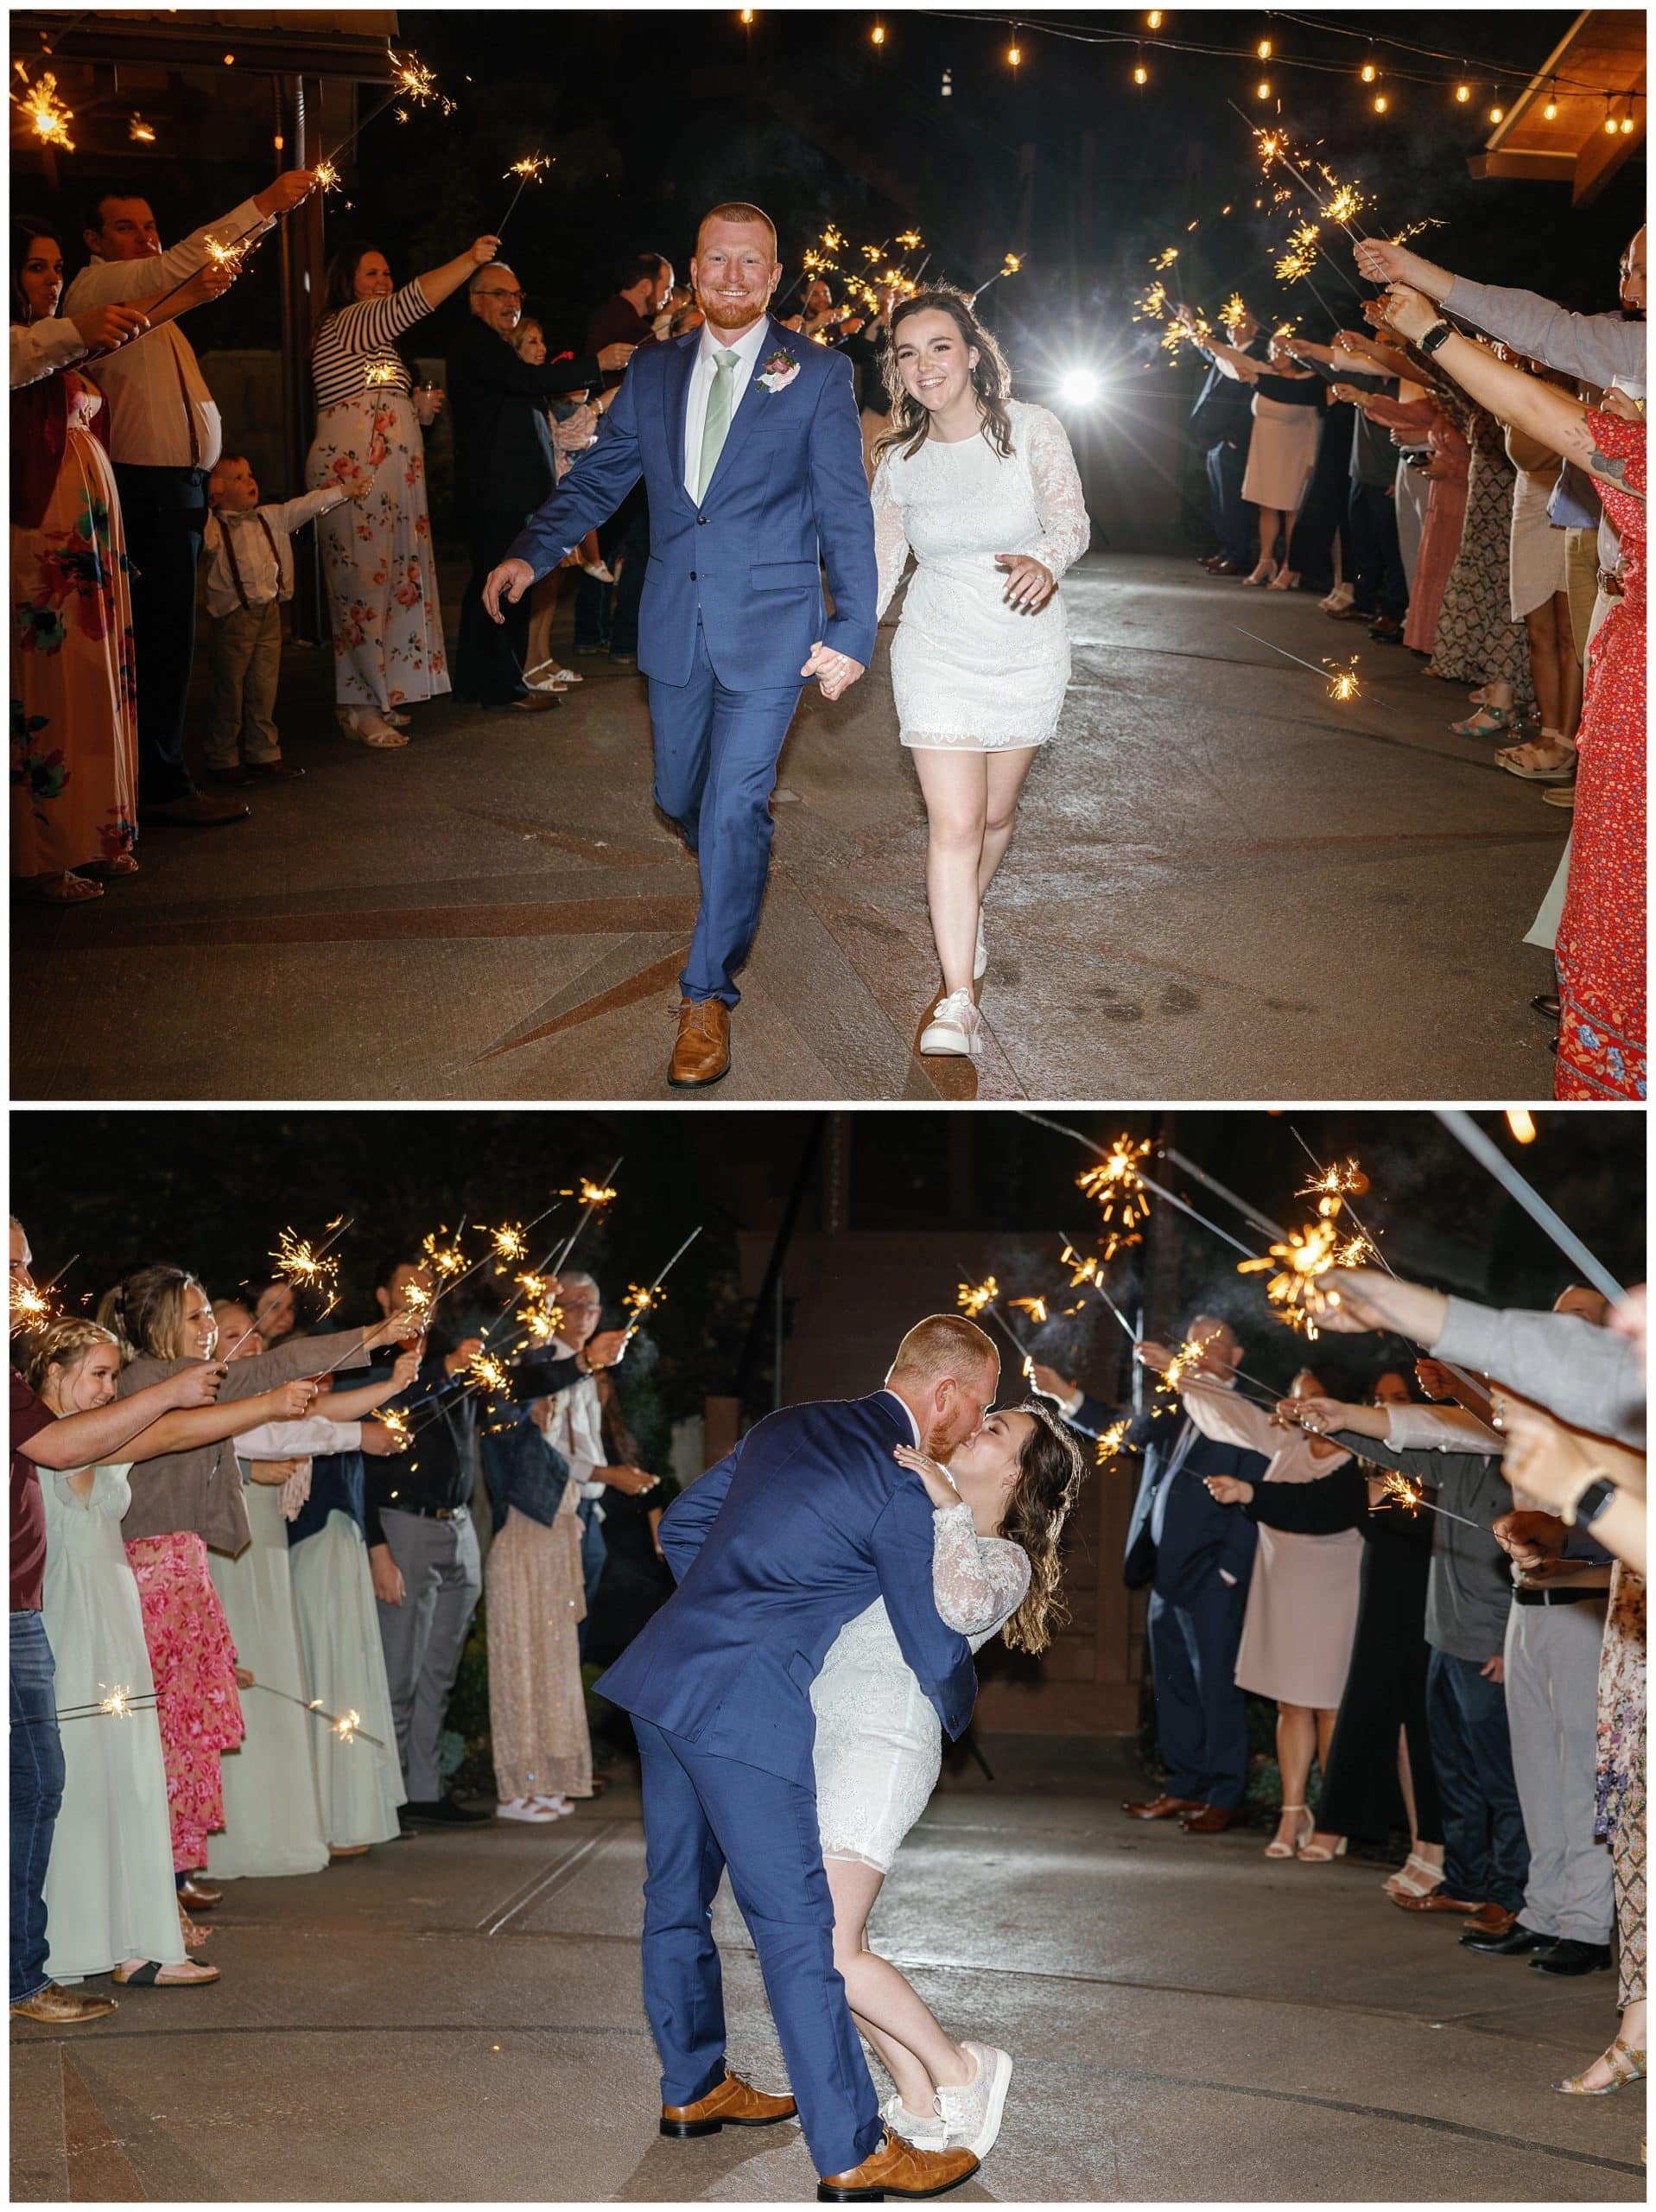 sparkler exit photos with couple surrounded by friends and family for wedding at parker mill